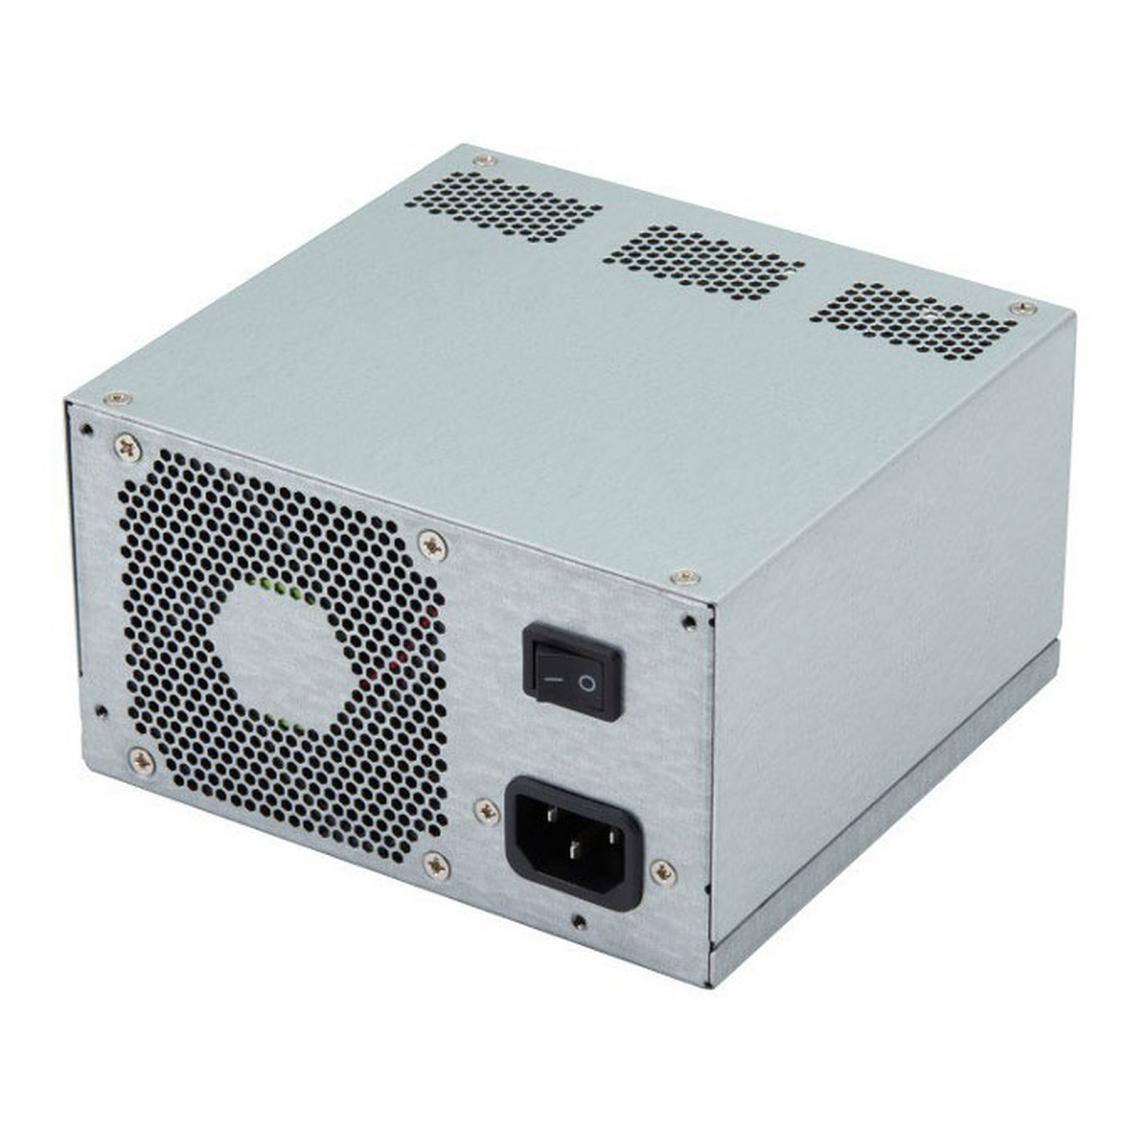 Fsp - PFL(SK) SERIES 350W - Alimentation modulaire